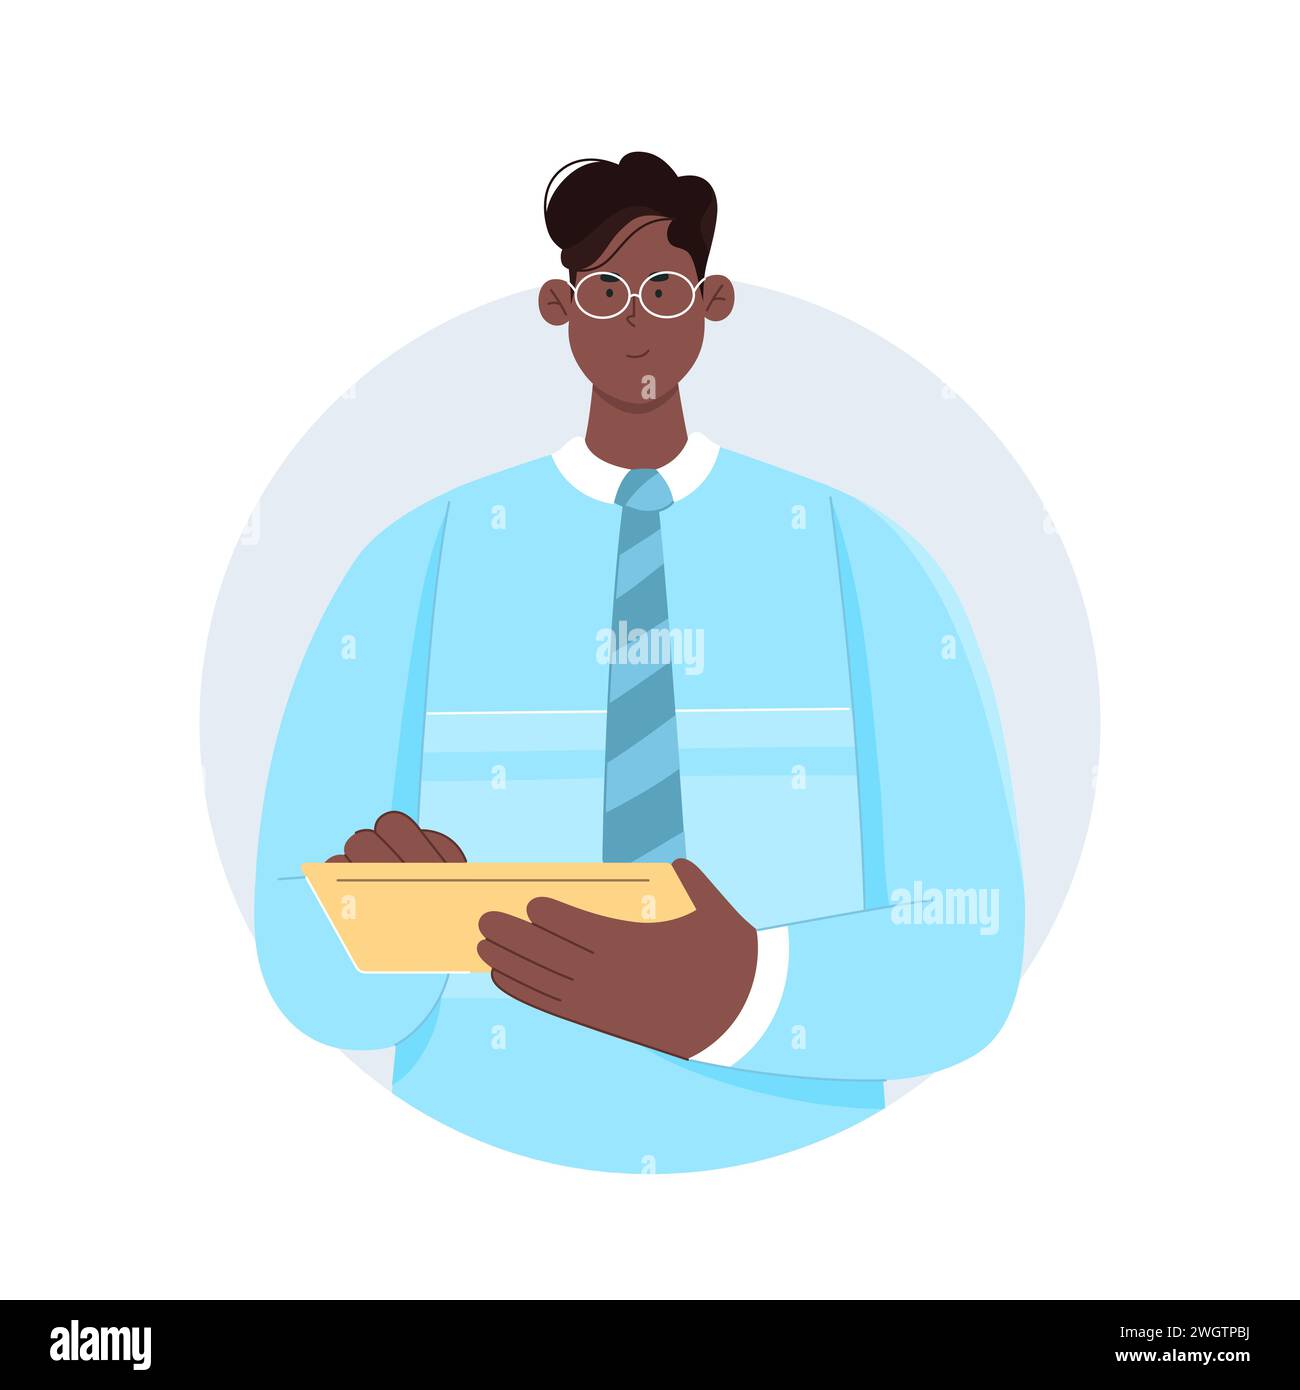 Businessman holding a tablet. Office manager, chief executive officer cartoon vector illustration Stock Vector